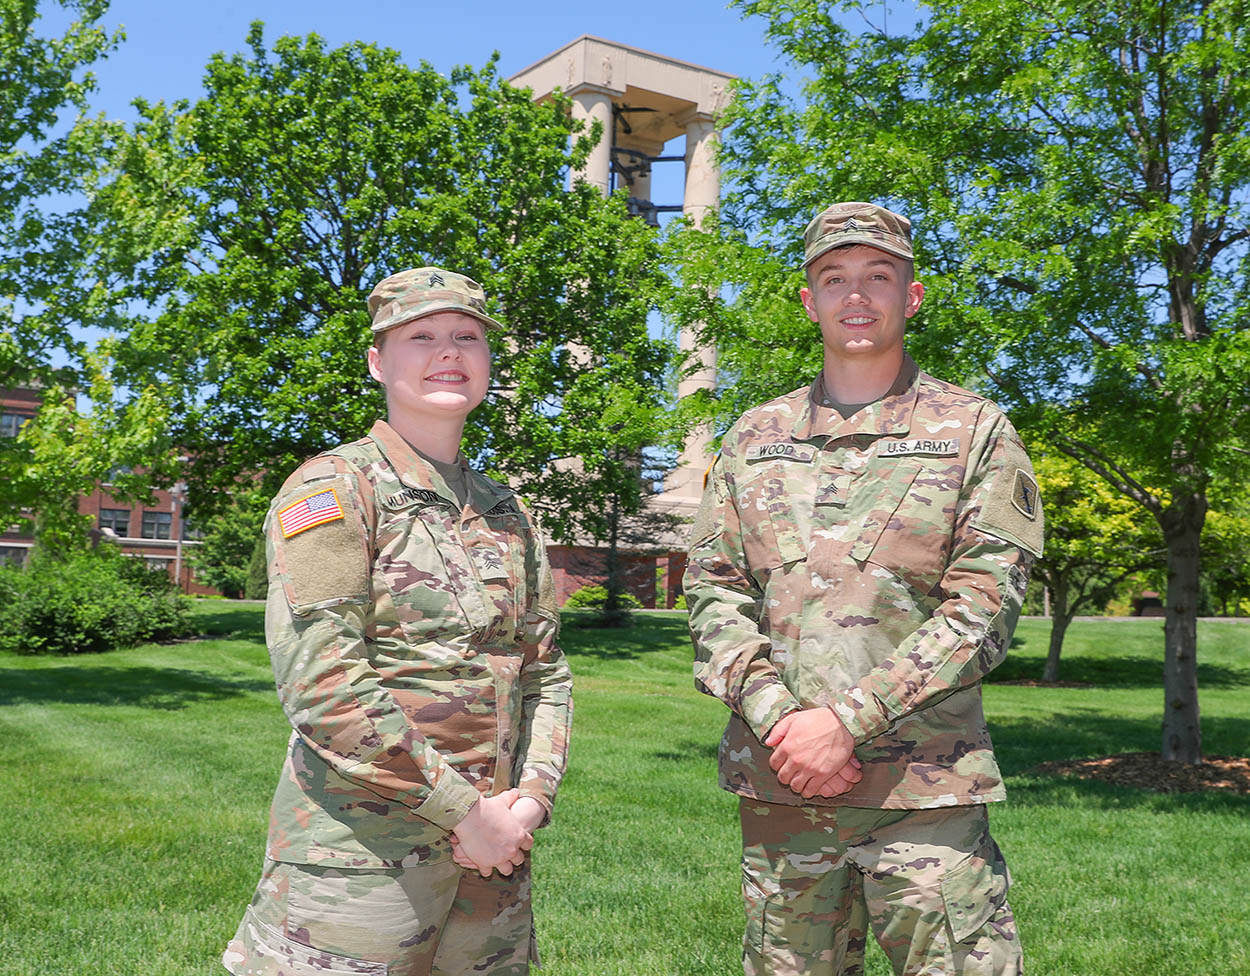 UNK seniors Haley Munson and Trevor Wood both serve in the Nebraska Army National Guard. They supported the Guard’s response to the COVID-19 pandemic while finishing the spring semester. (Photos by Corbey R. Dorsey, UNK Communications)